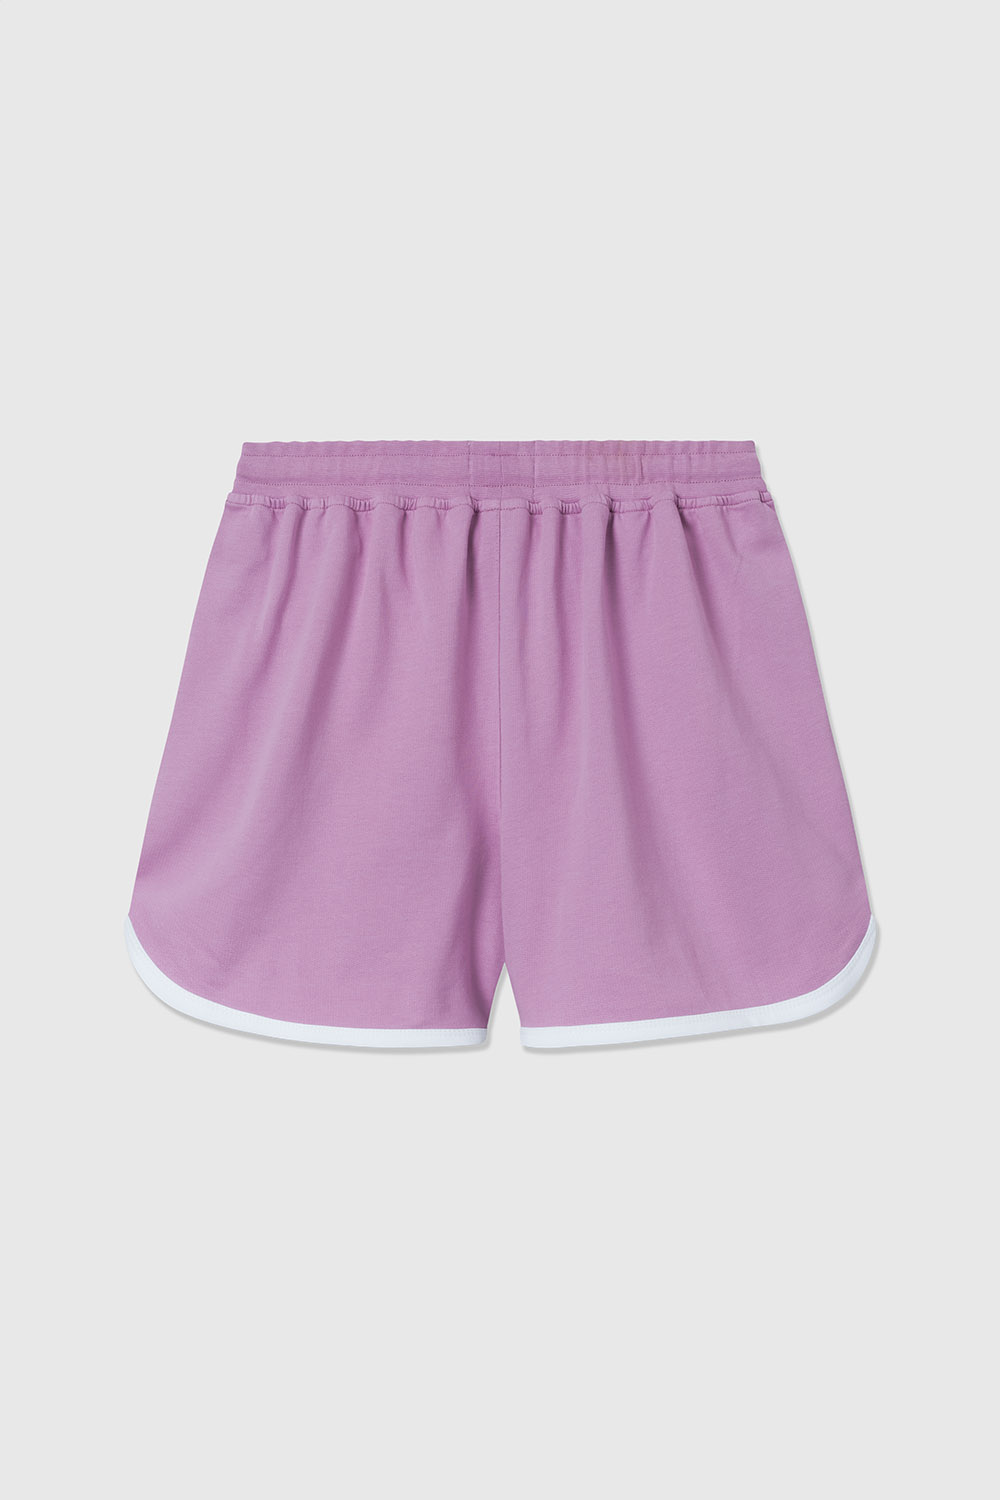 Double A by Wood Wood Tia stacked logo retro shorts Rosy lavender ...